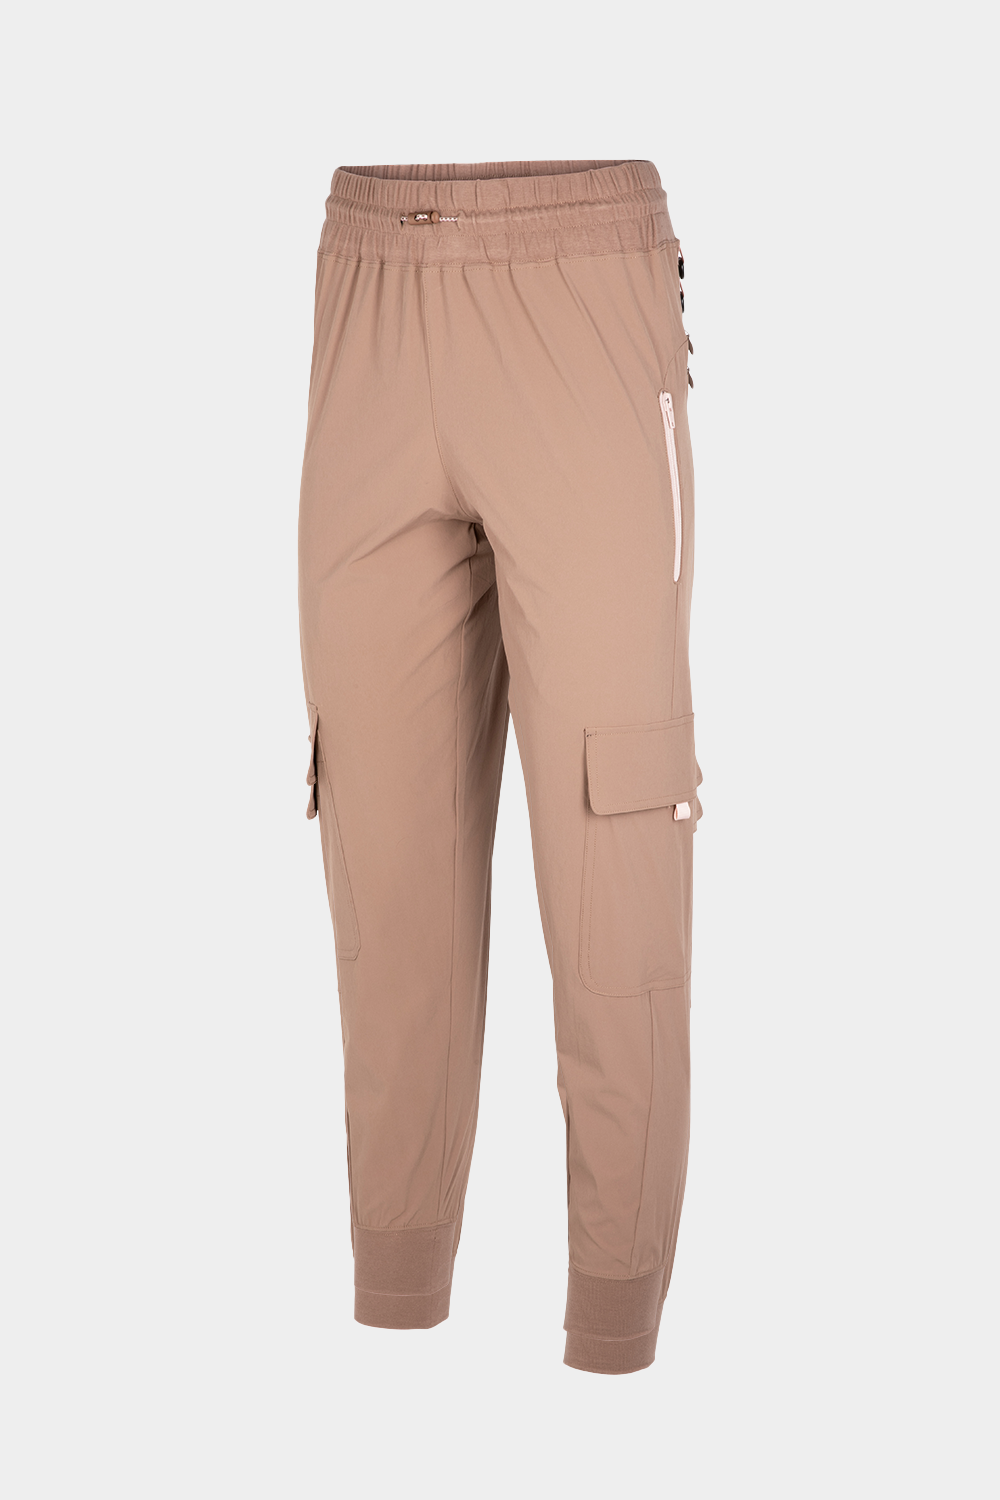 front view of brown lightweight women's climbing pants with cargo pockets and elastic waistband on female mannequin